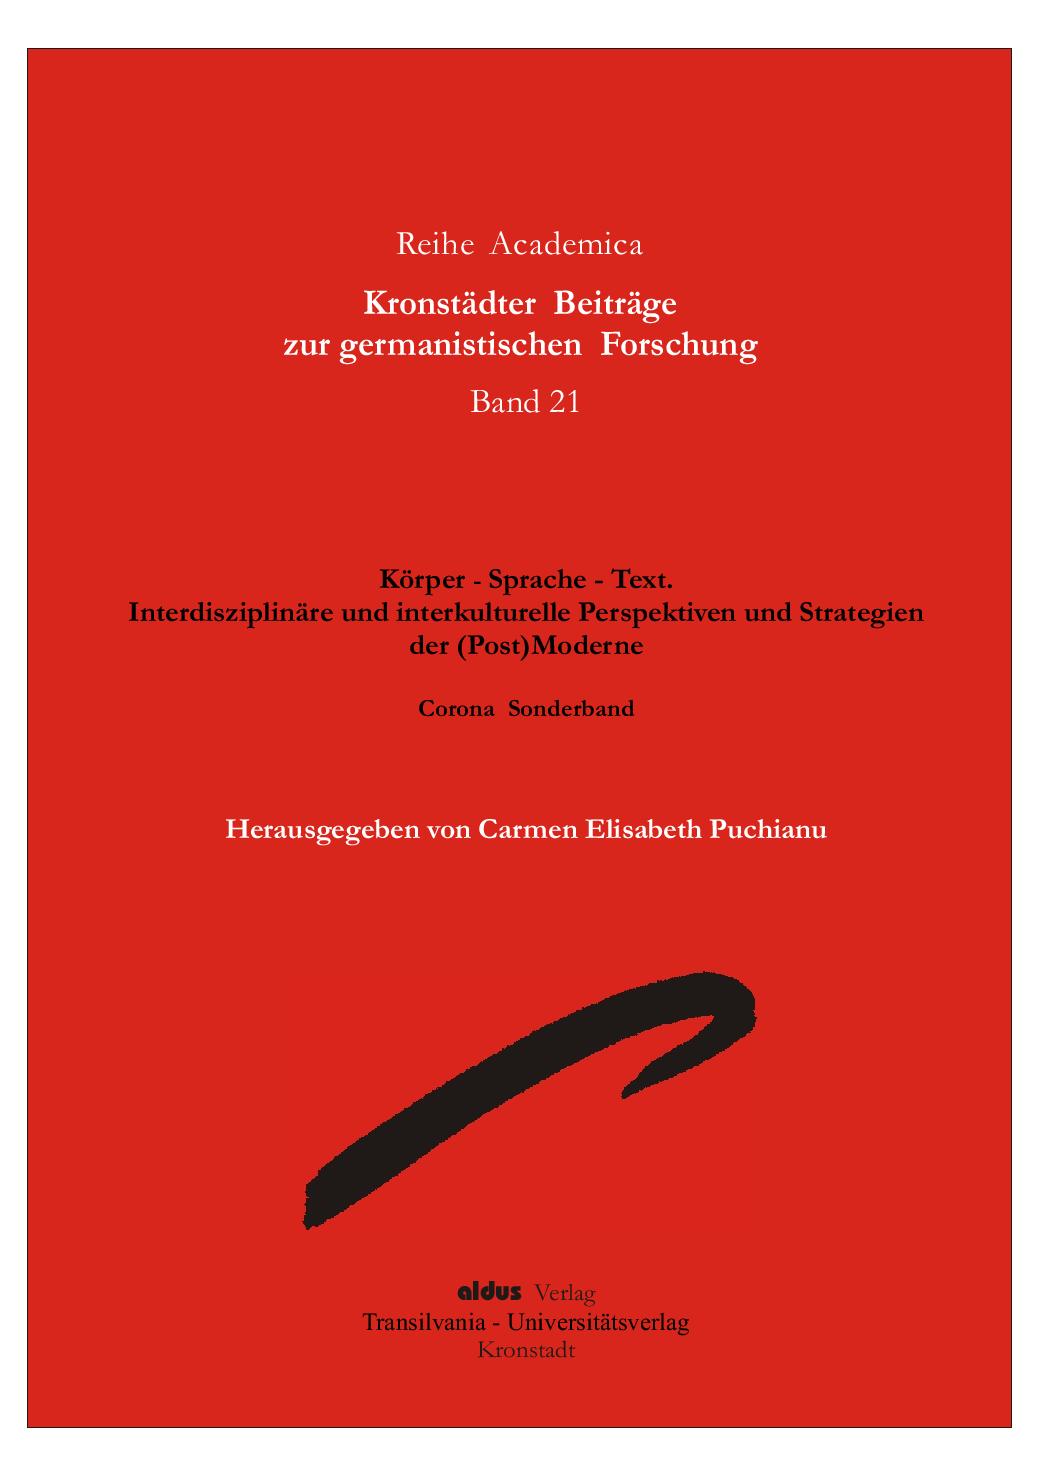 Heart Metaphors in German and Romanian Cover Image